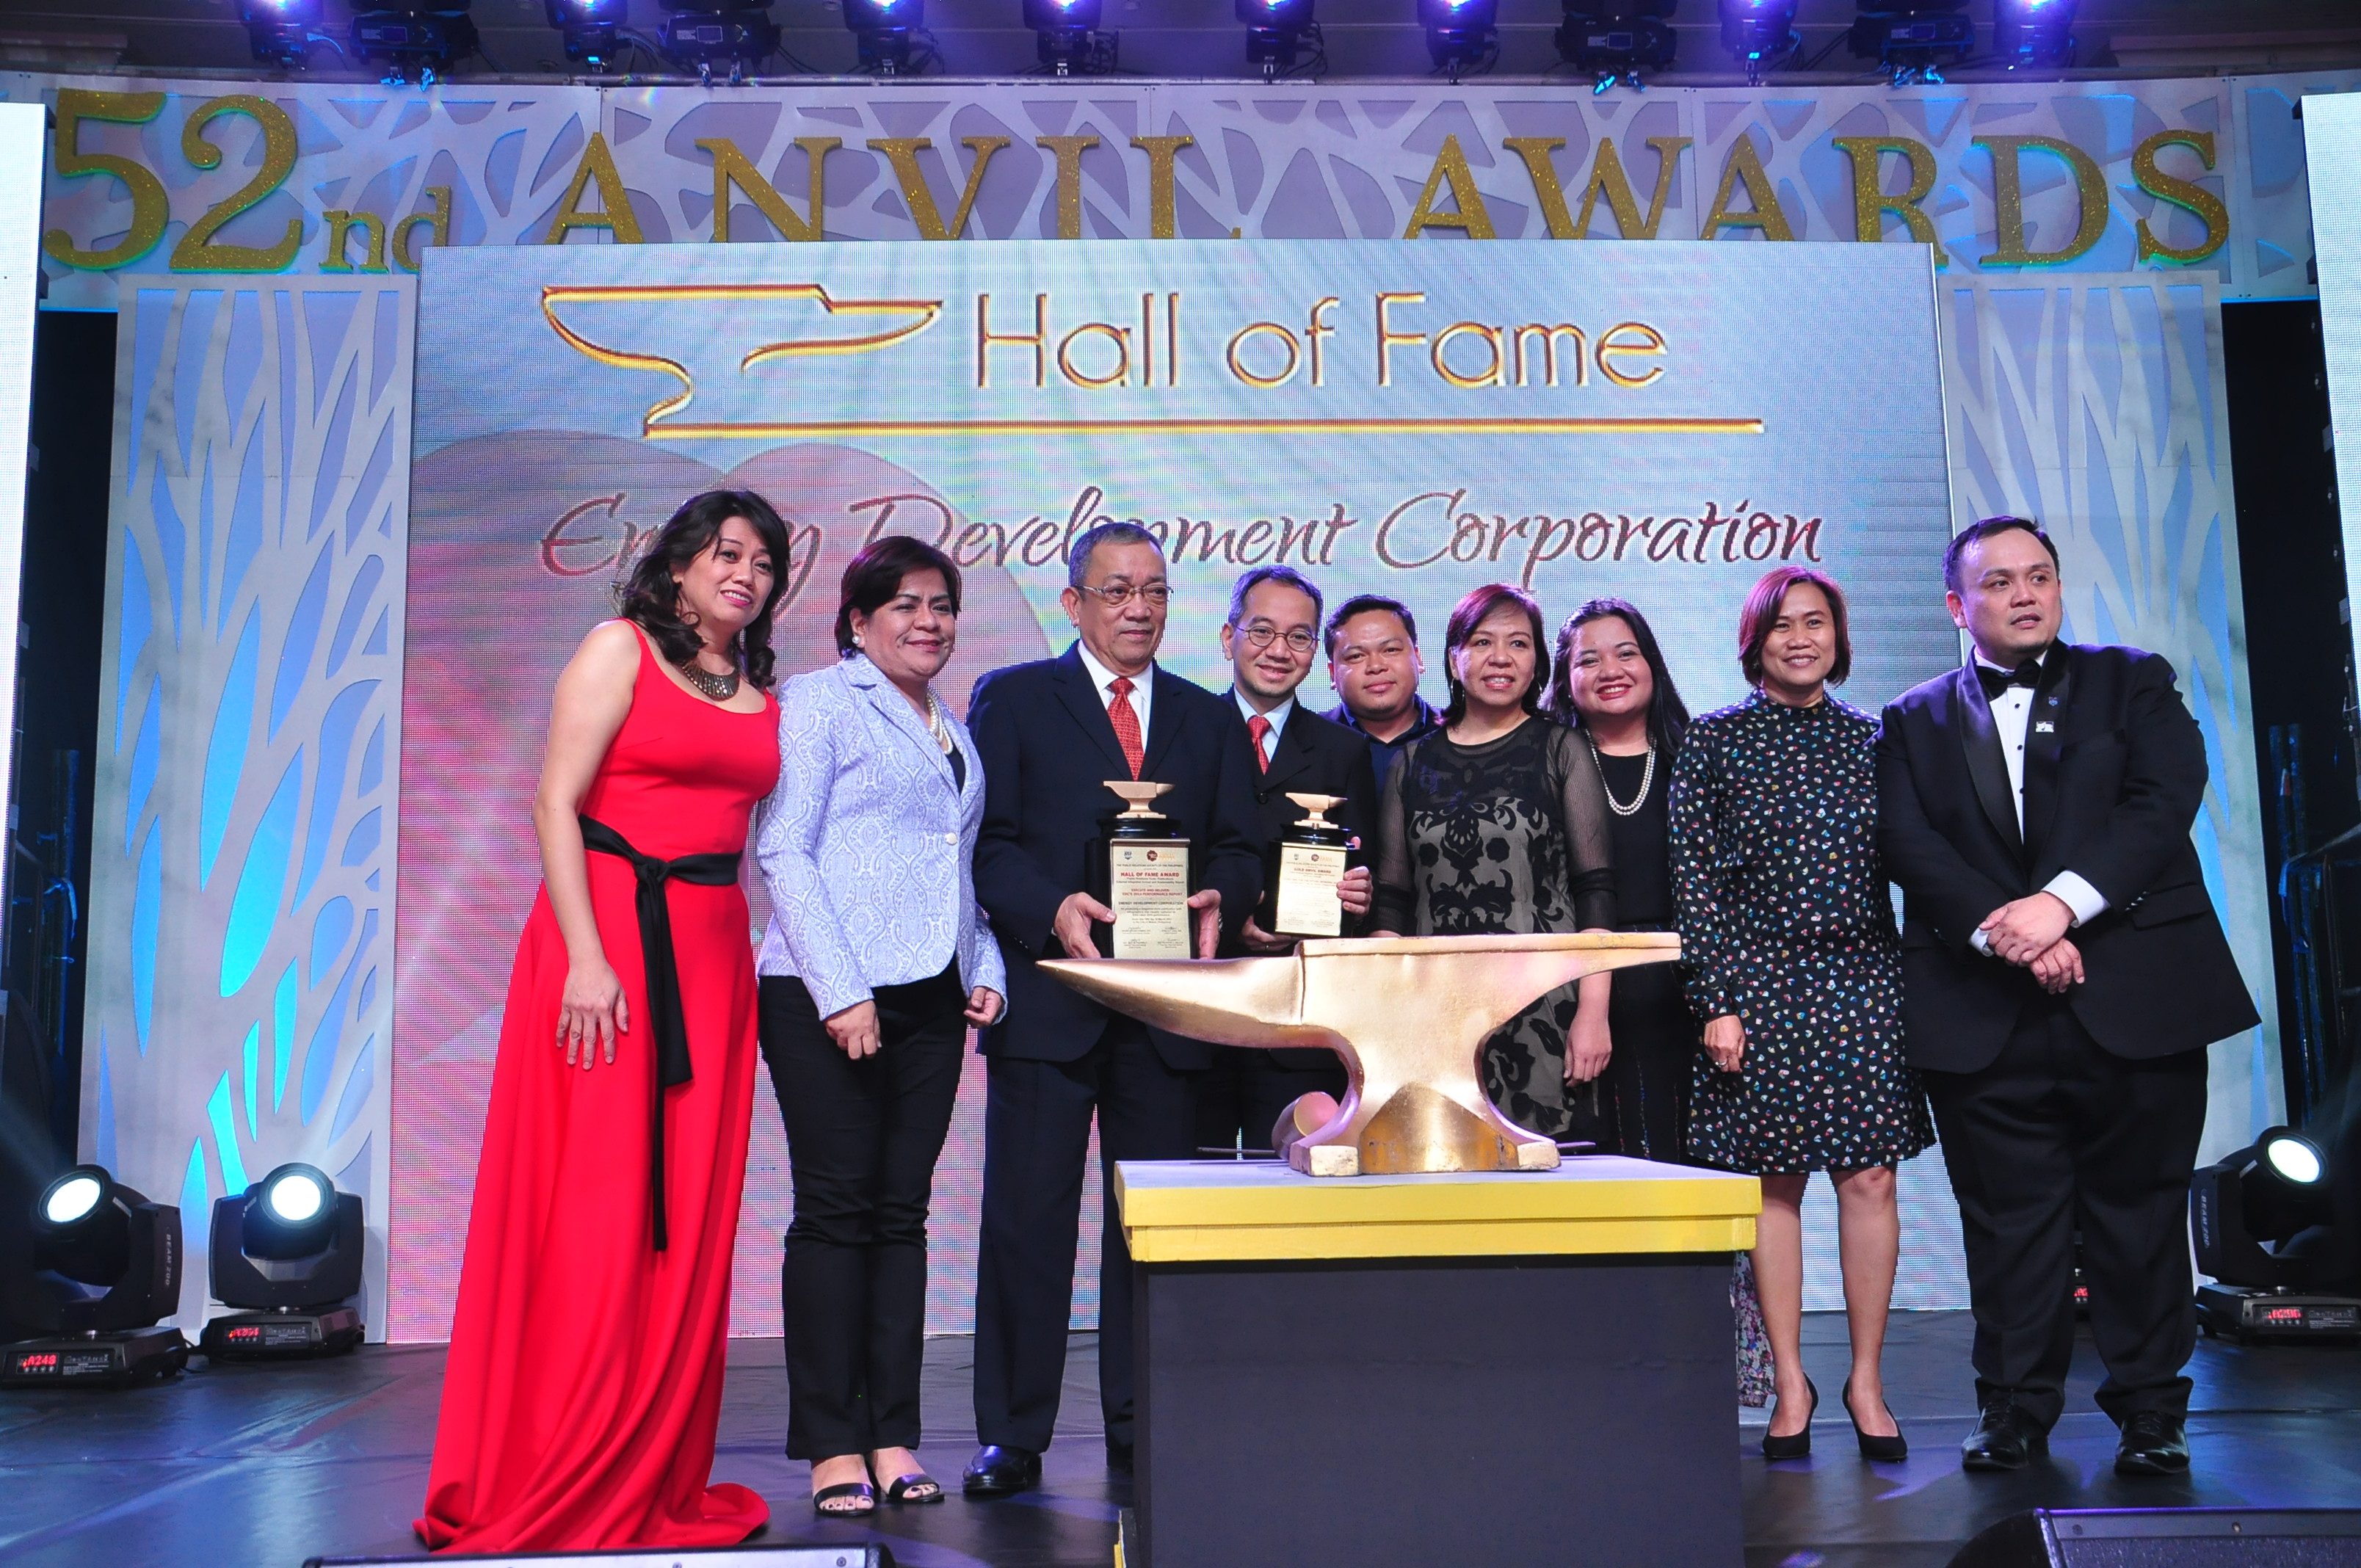 Energy Development Corporation, Hall of Fame – Annual Report, having won five consecutive Gold Anvil Awards 